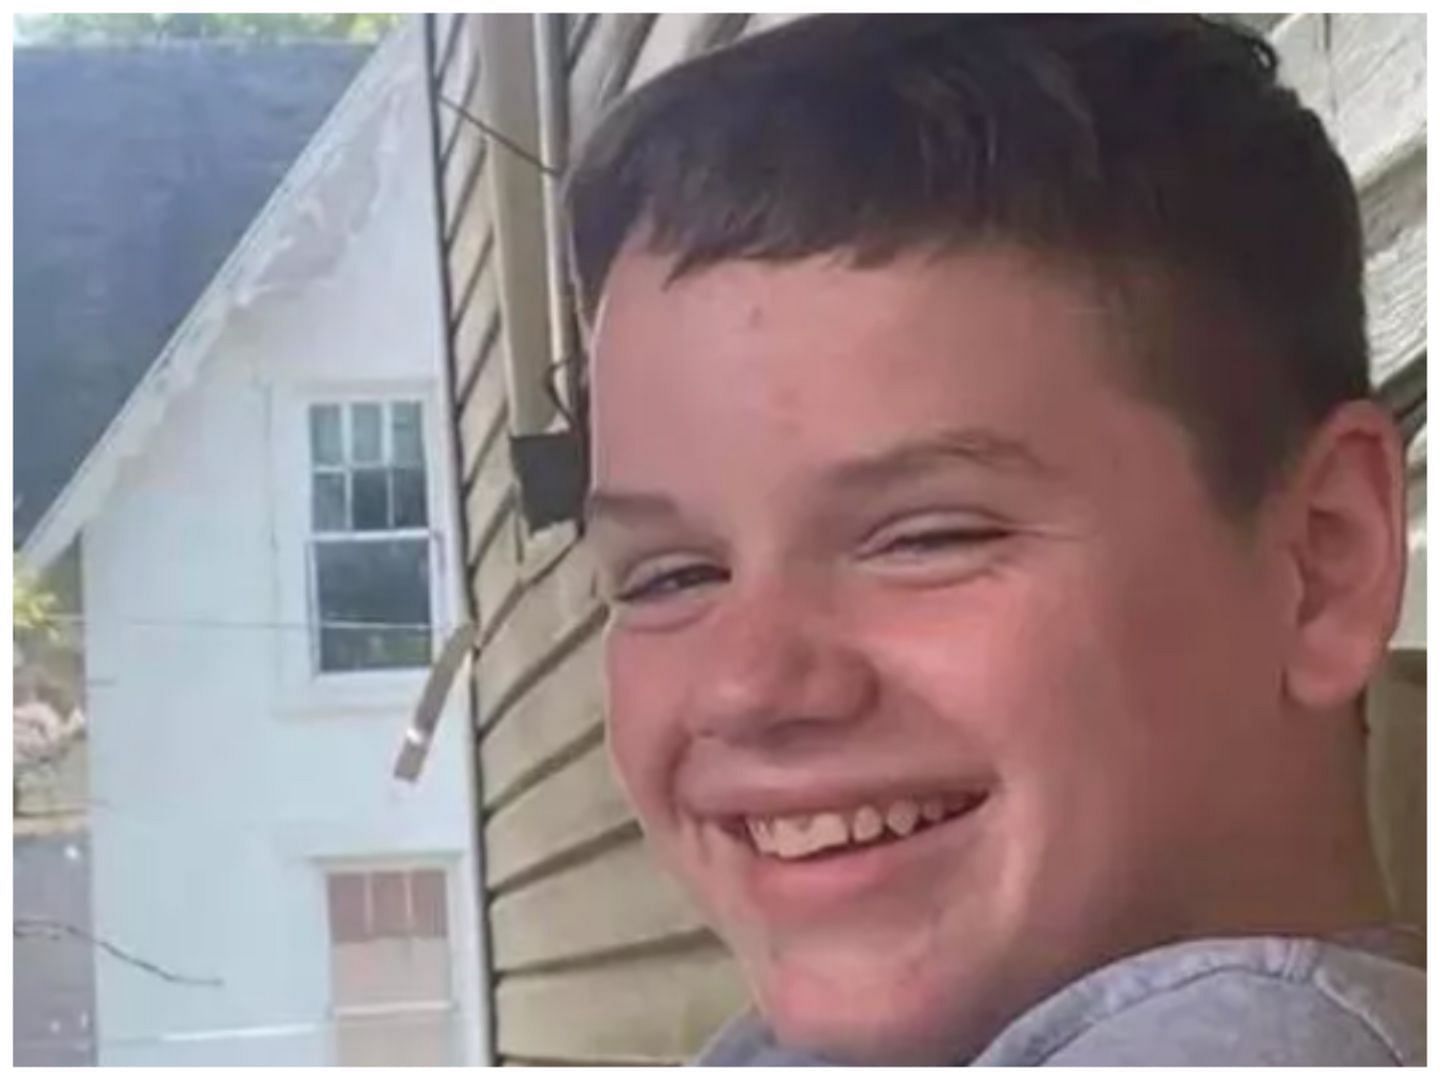 A teenage boy in Ohio has died after attempting the &quot;TikTok Benadryl challenge&quot; (Image via Gofundme)